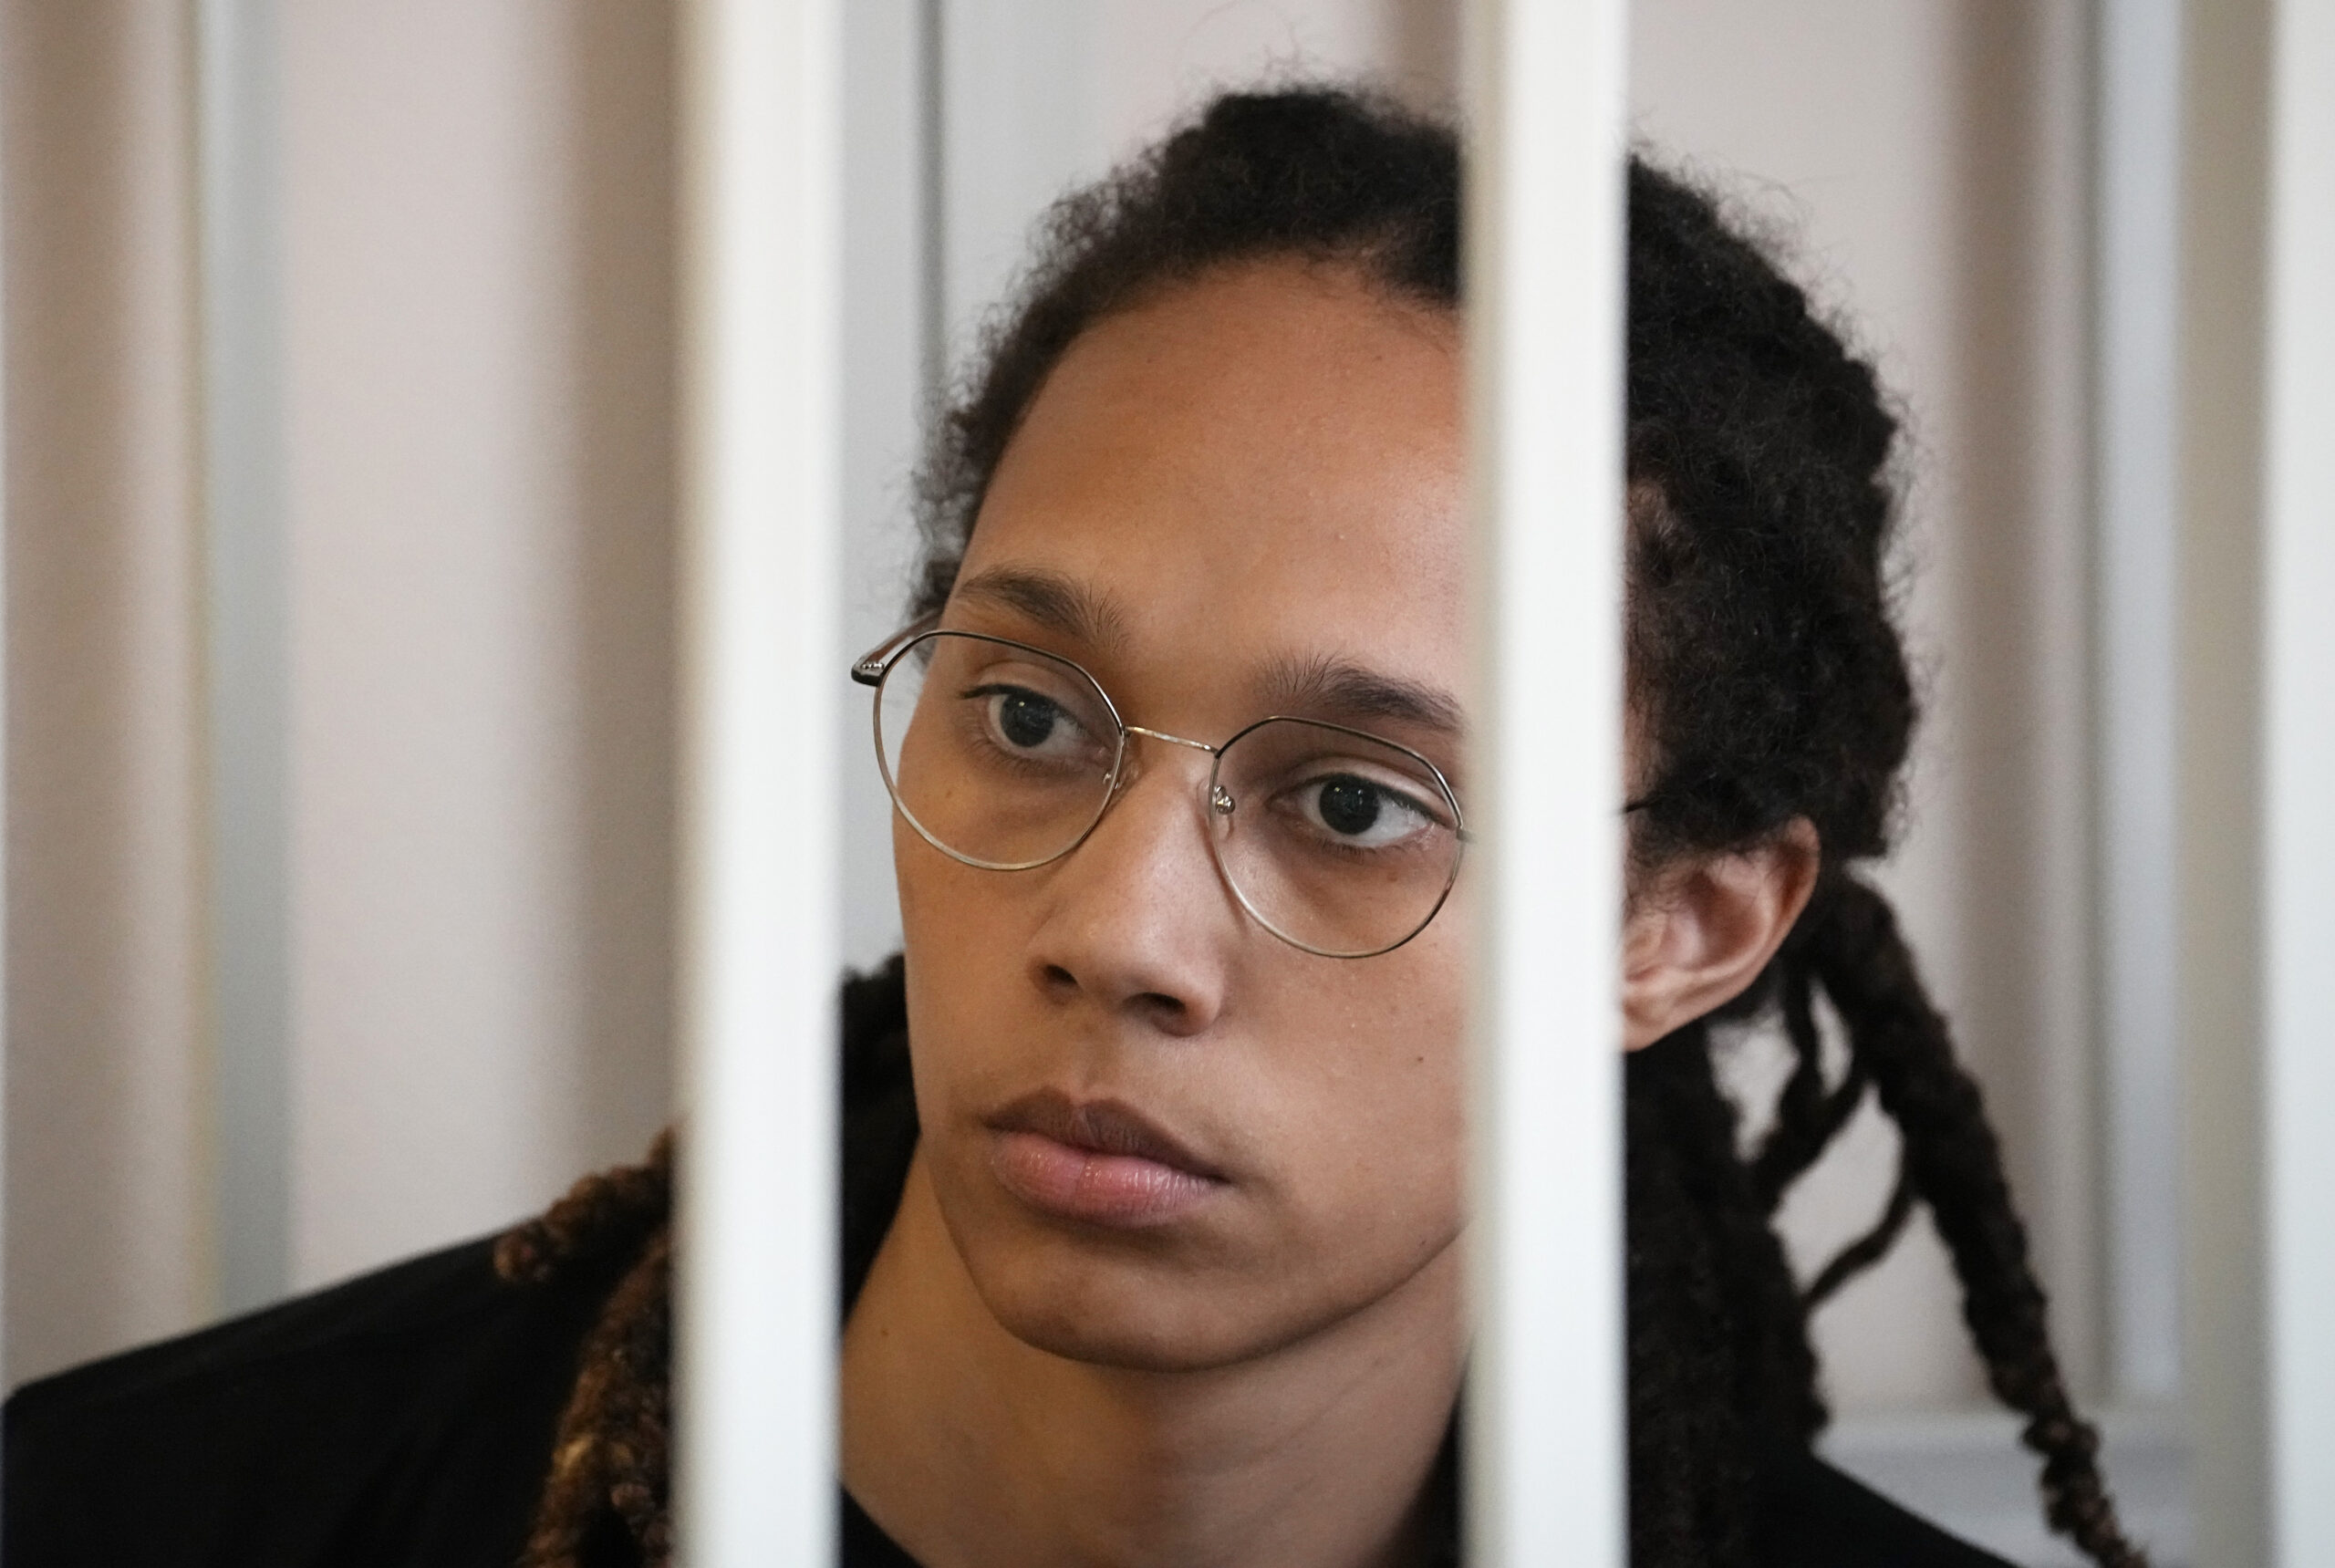 WNBA star and two-time Olympic gold medalist Brittney Griner sits in a cage at a court room prior to a hearing, in Khimki just outside Moscow, Russia, Wednesday, July 27, 2022. American basketball star Brittney Griner returned Wednesday to a Russian courtroom for her drawn-out trial on drug charges that could bring her 10 years in prison of convicted. (AP Photo/Alexander Zemlianichenko, Pool)